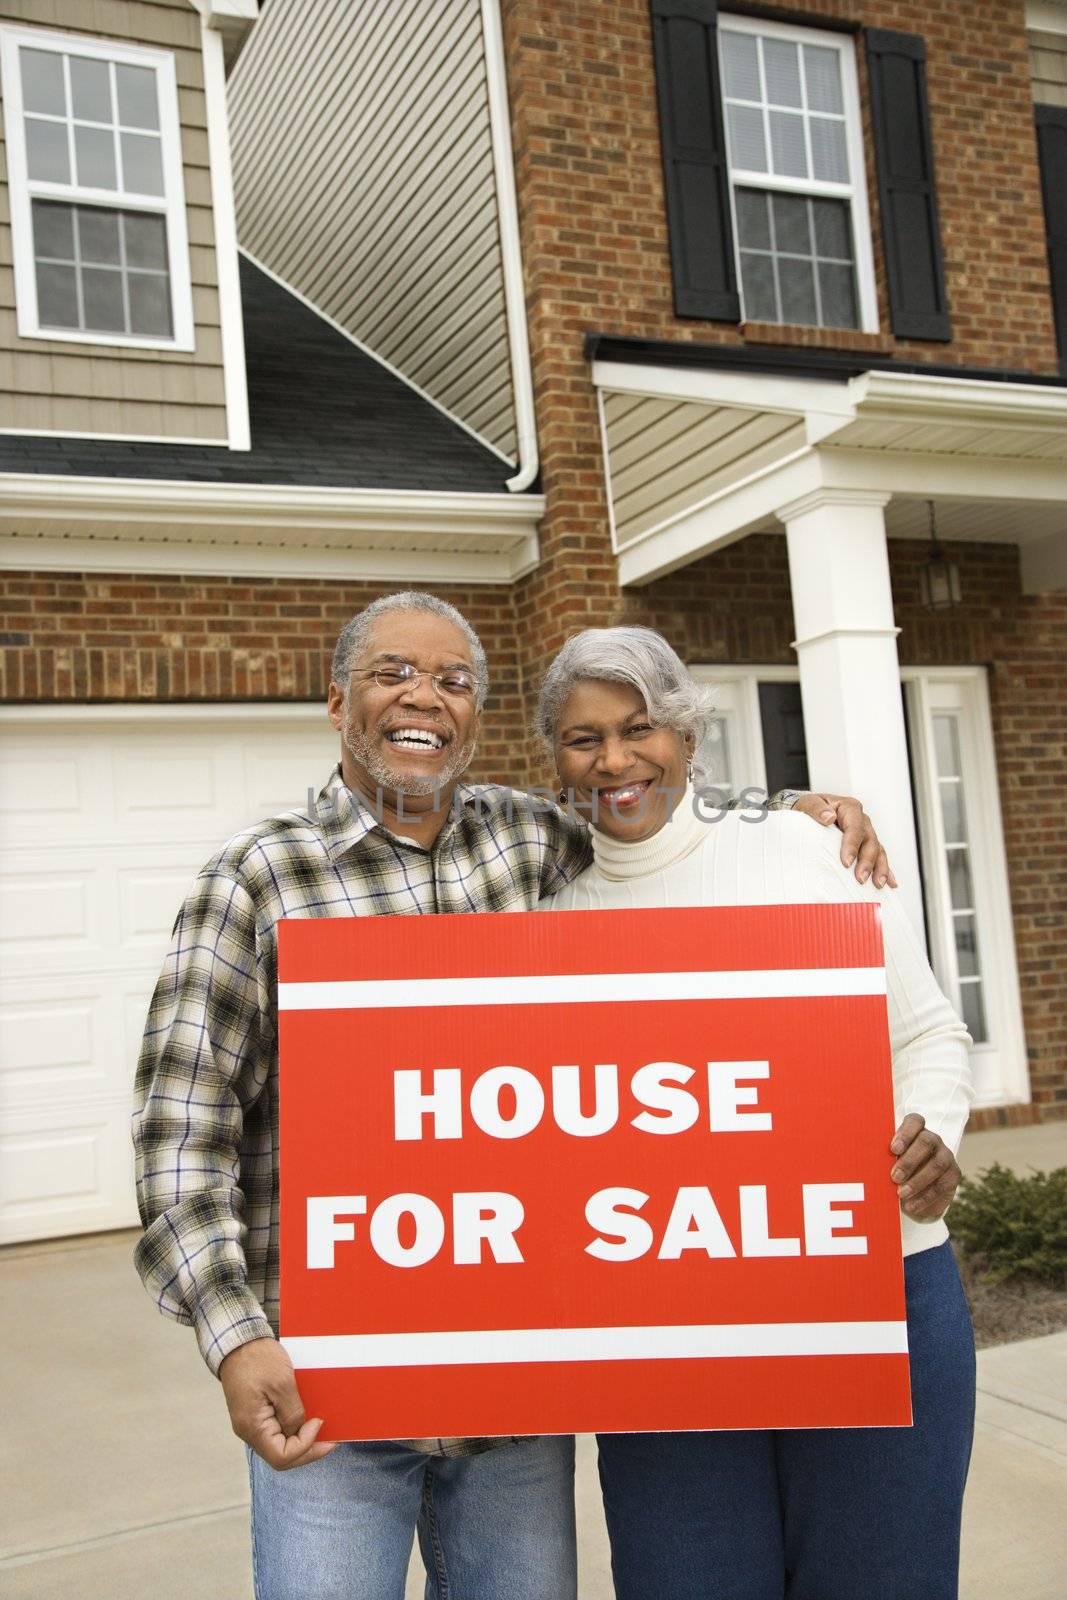 Portrait of middle-aged African-American couple outside house with for sale sign.